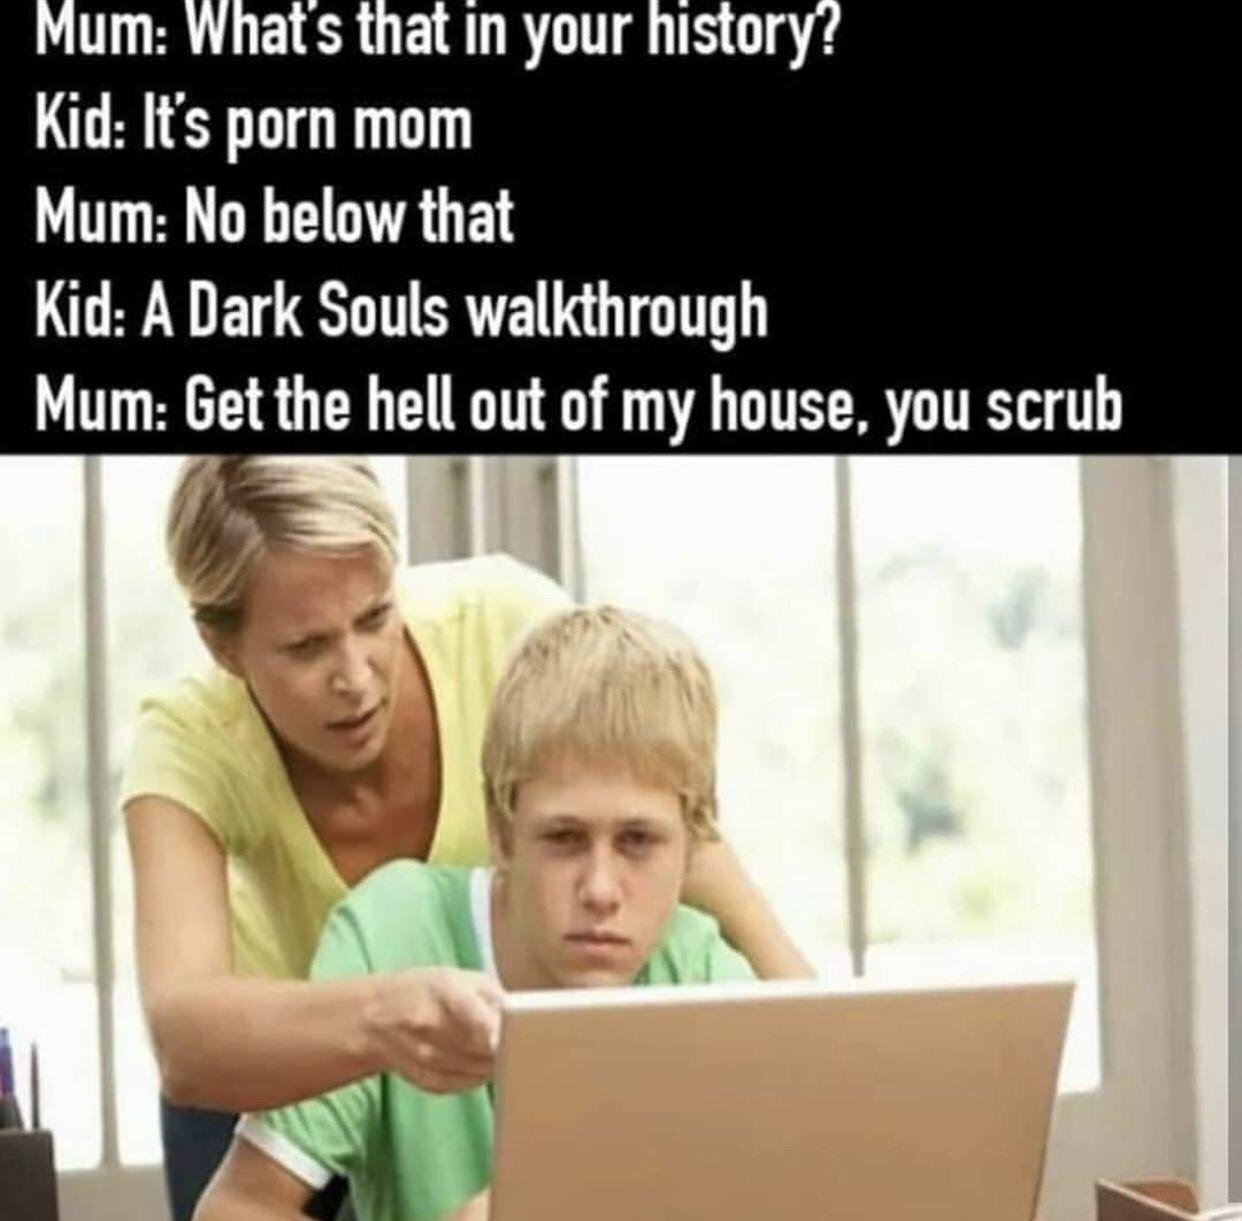 funny gaming memes  - Internet meme - Mum What's that in your history? Kid It's porn mom Mum No below that Kid A Dark Souls walkthrough Mum Get the hell out of my house, you scrub